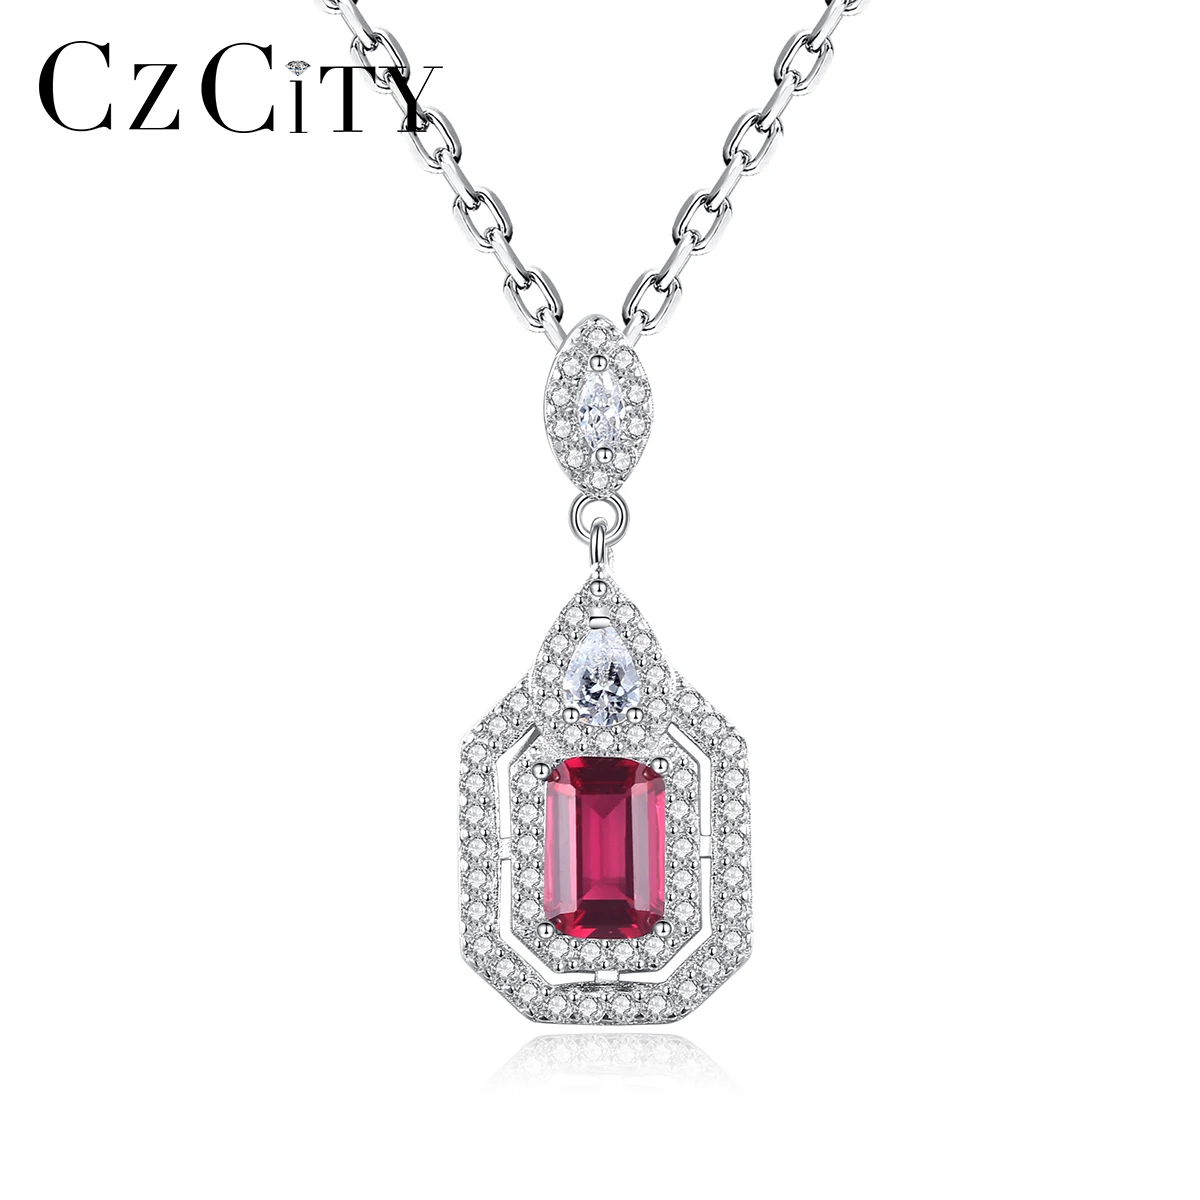 

Factory 925 Sterling Silver Necklace Emerald Cut Ruby Stone Pave Set Clear Cubic Zircon Pear Shaped Pendant Link Chain Jewelry